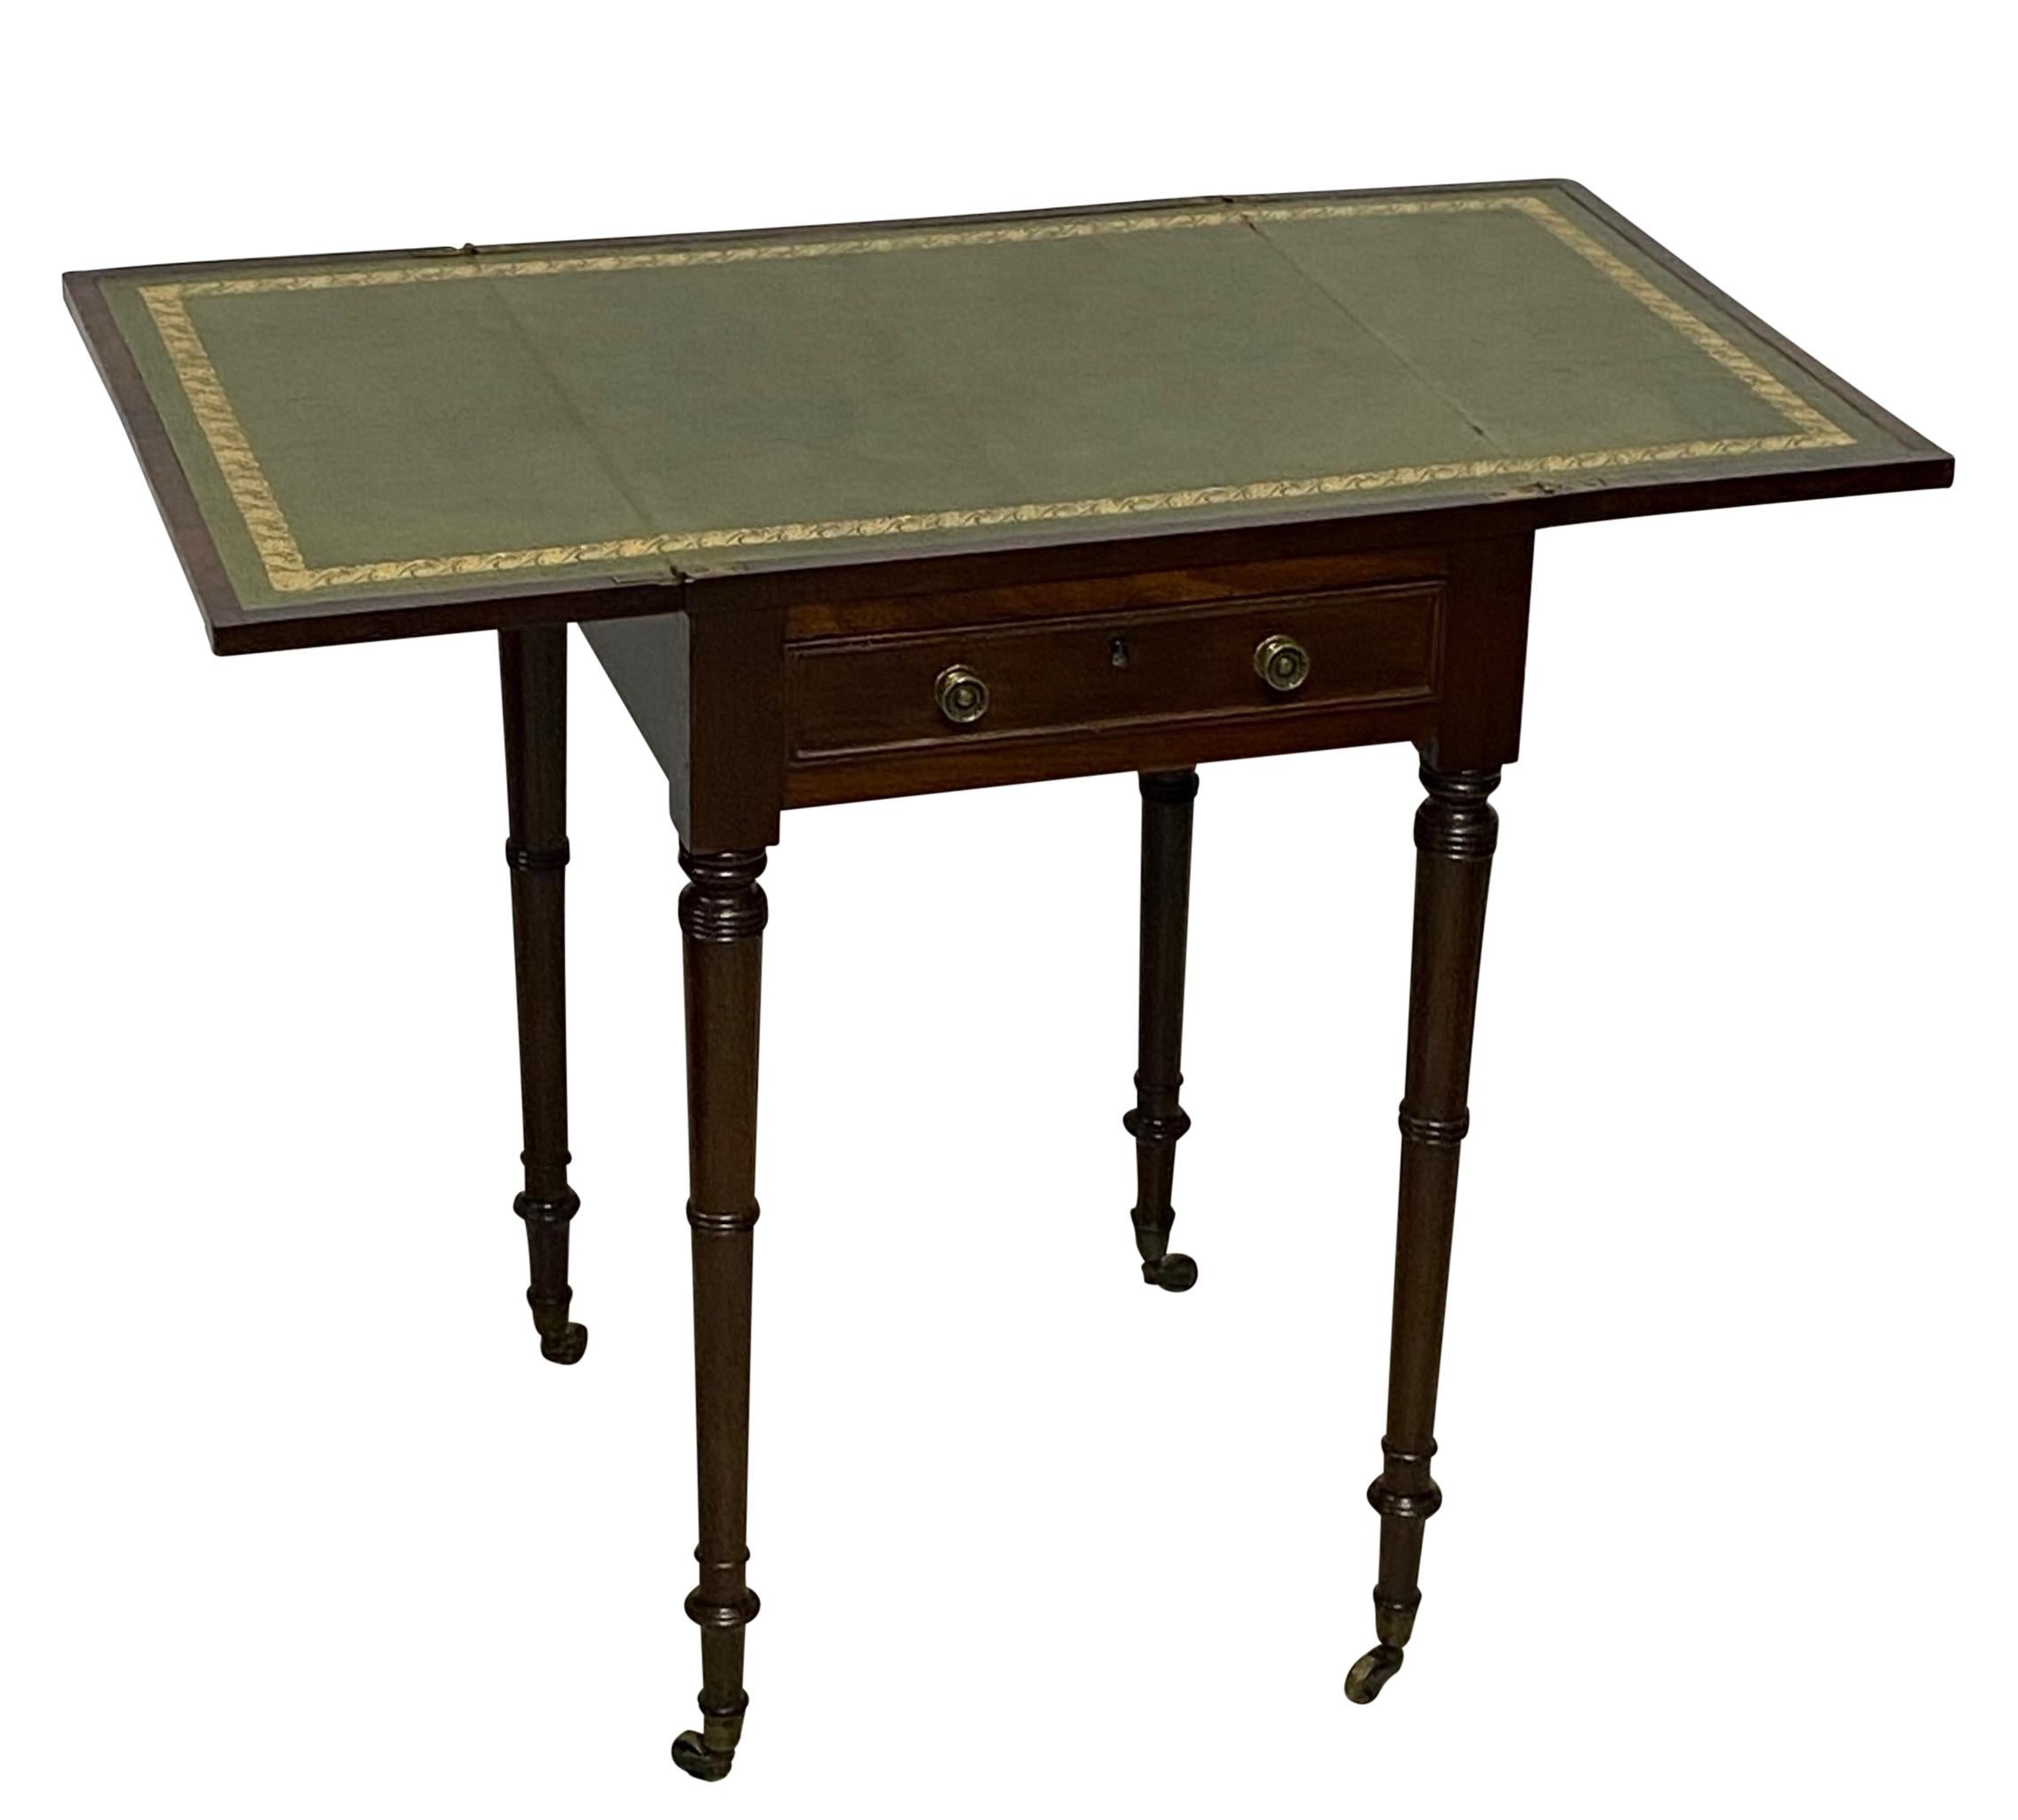 Regency Mahogany and Leather Side Table, English Early 19th Century For Sale 5